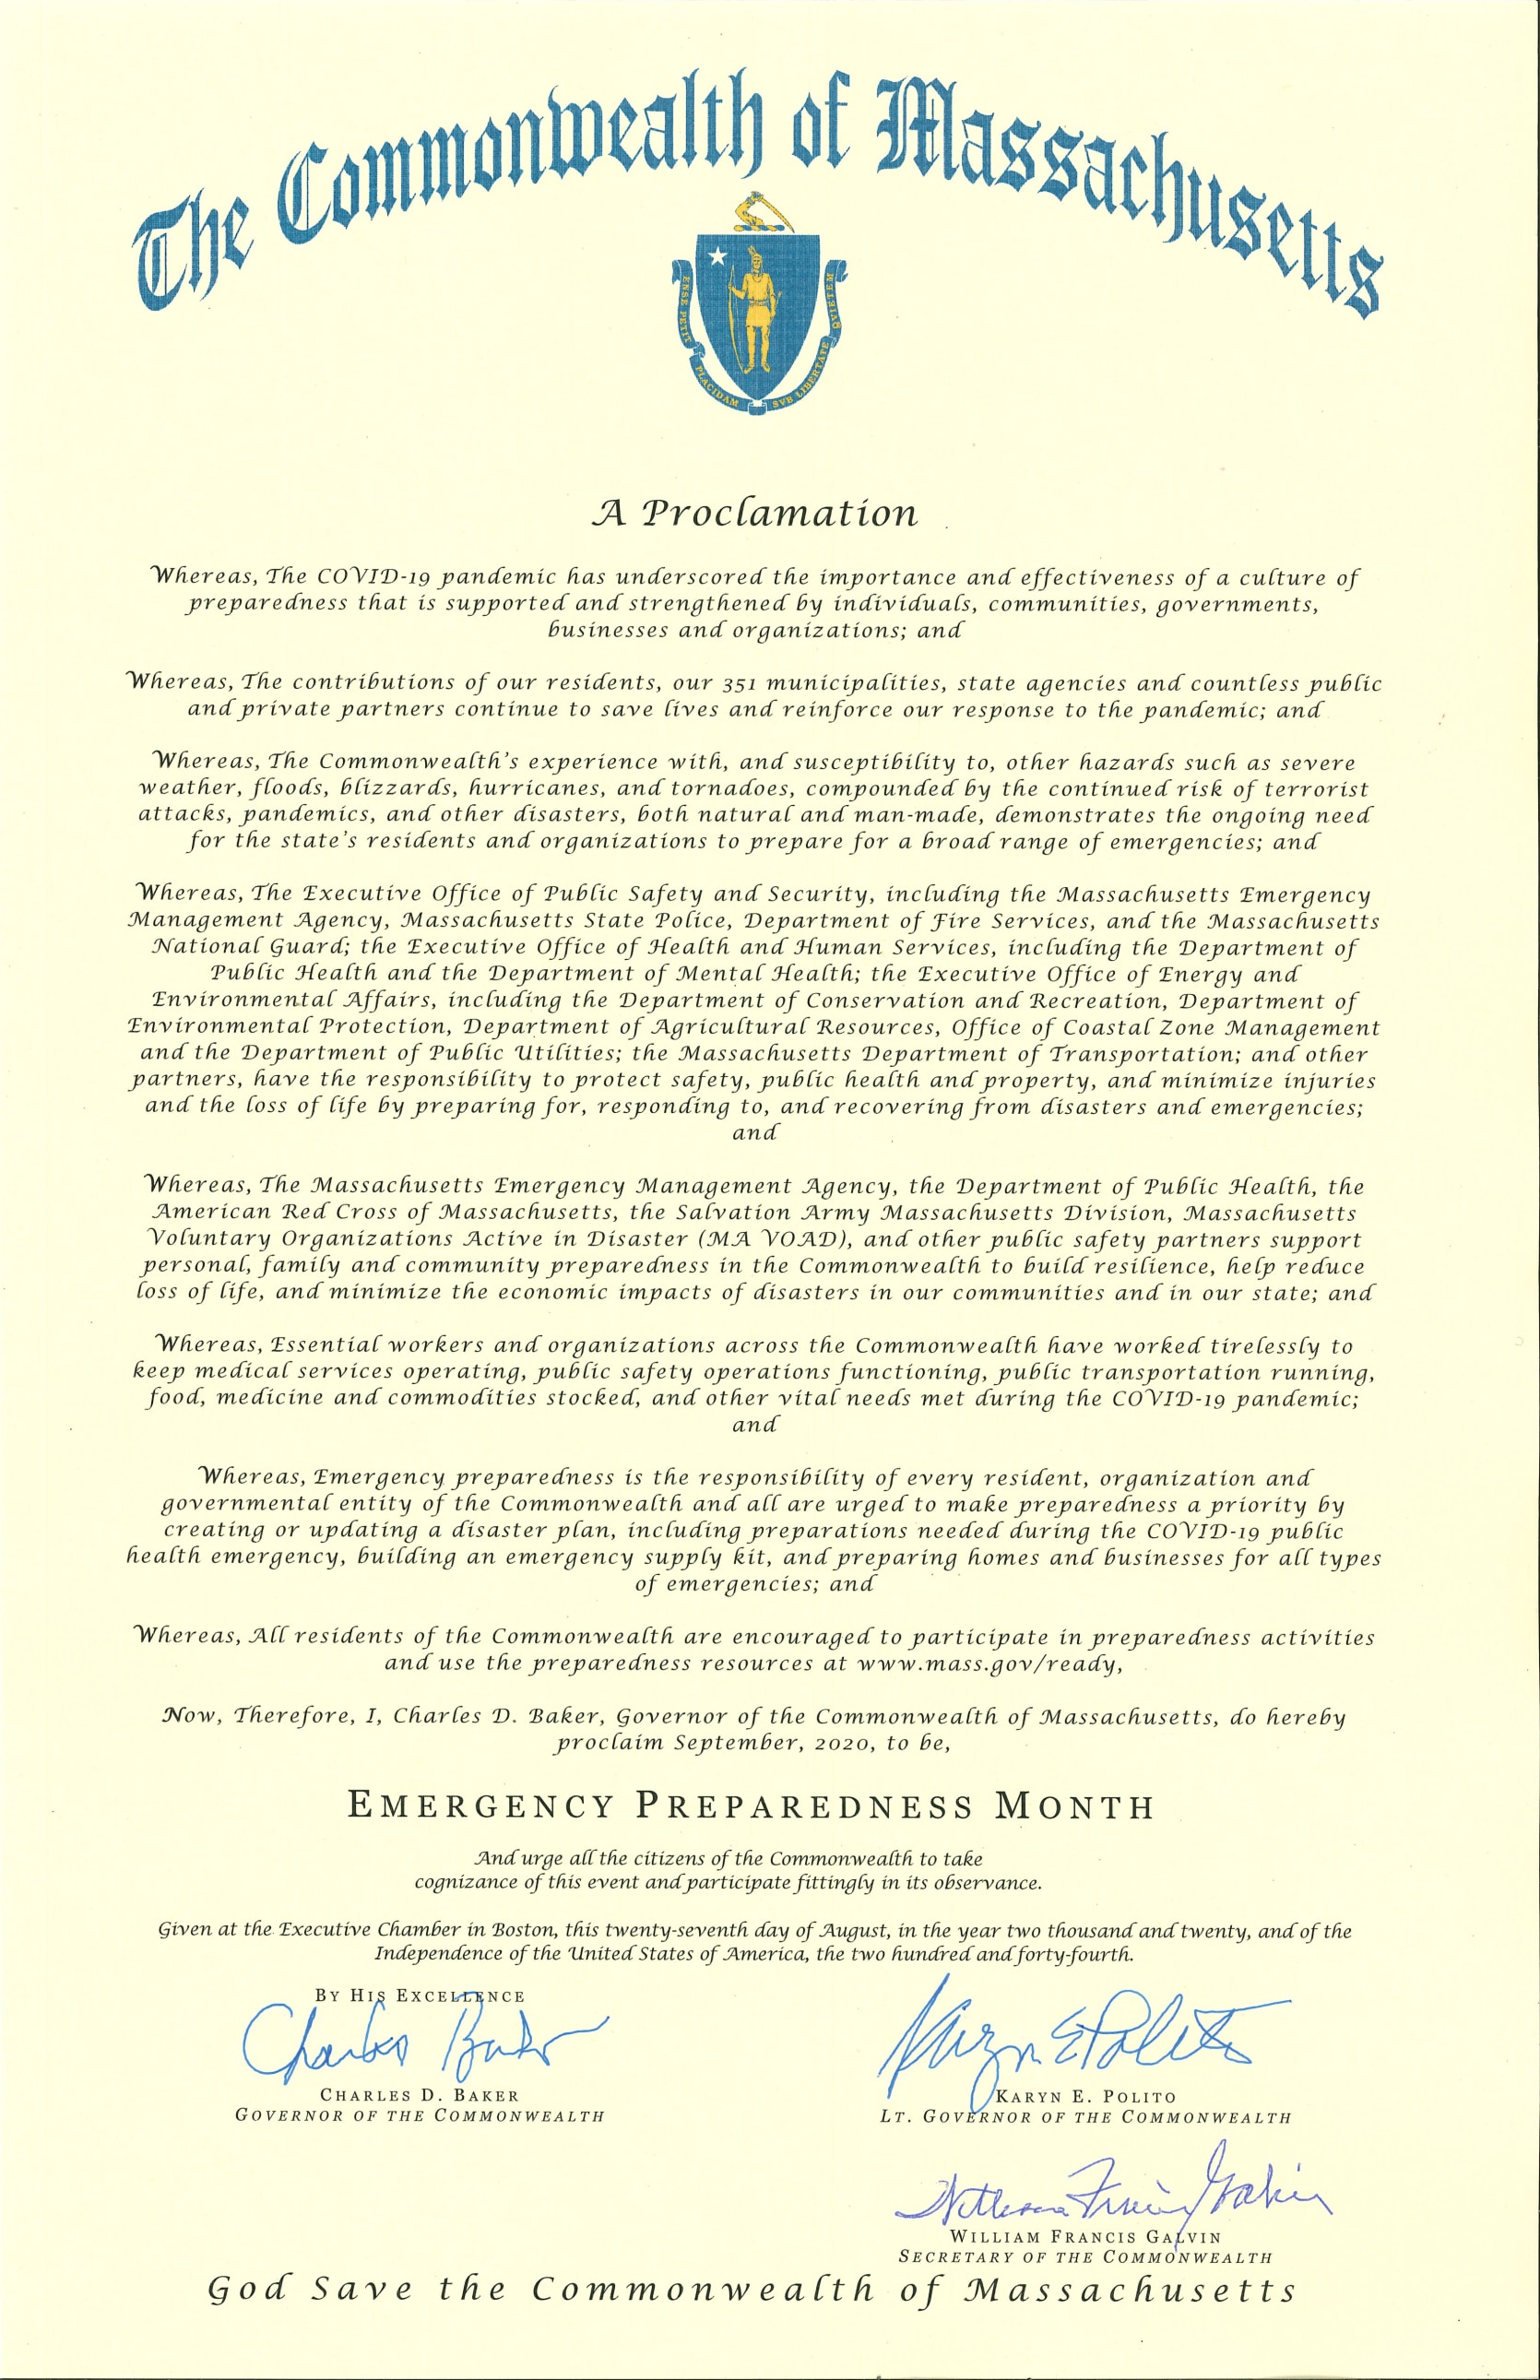 Proclamation with Governor Baker proclaiming September 2020 to be Emergency Preparedness Month